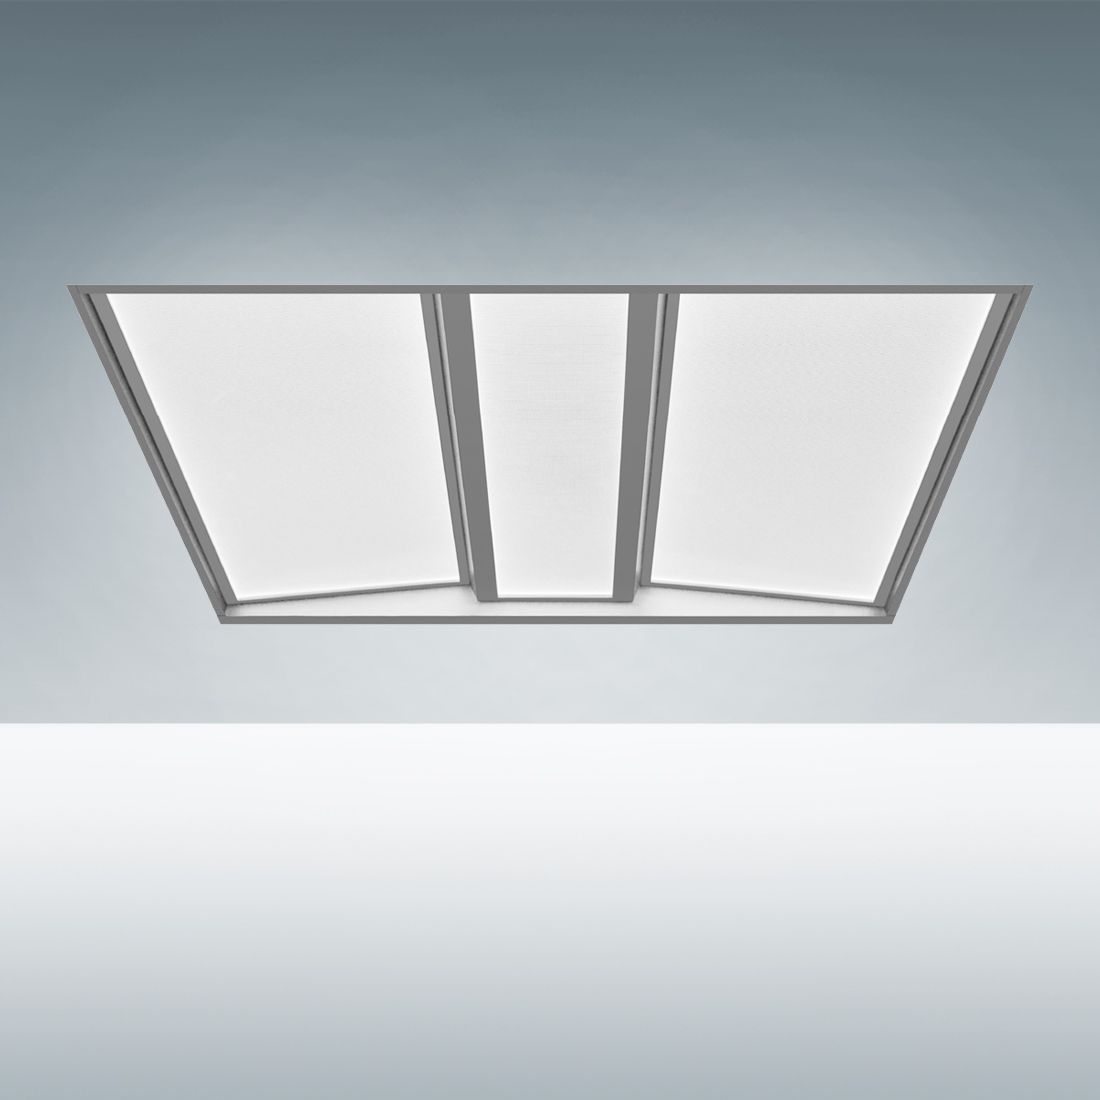 4-10PC 2x2 2x4 LED Panel Light 40/50W Dropped Ceiling Troffer Fixture Recessed